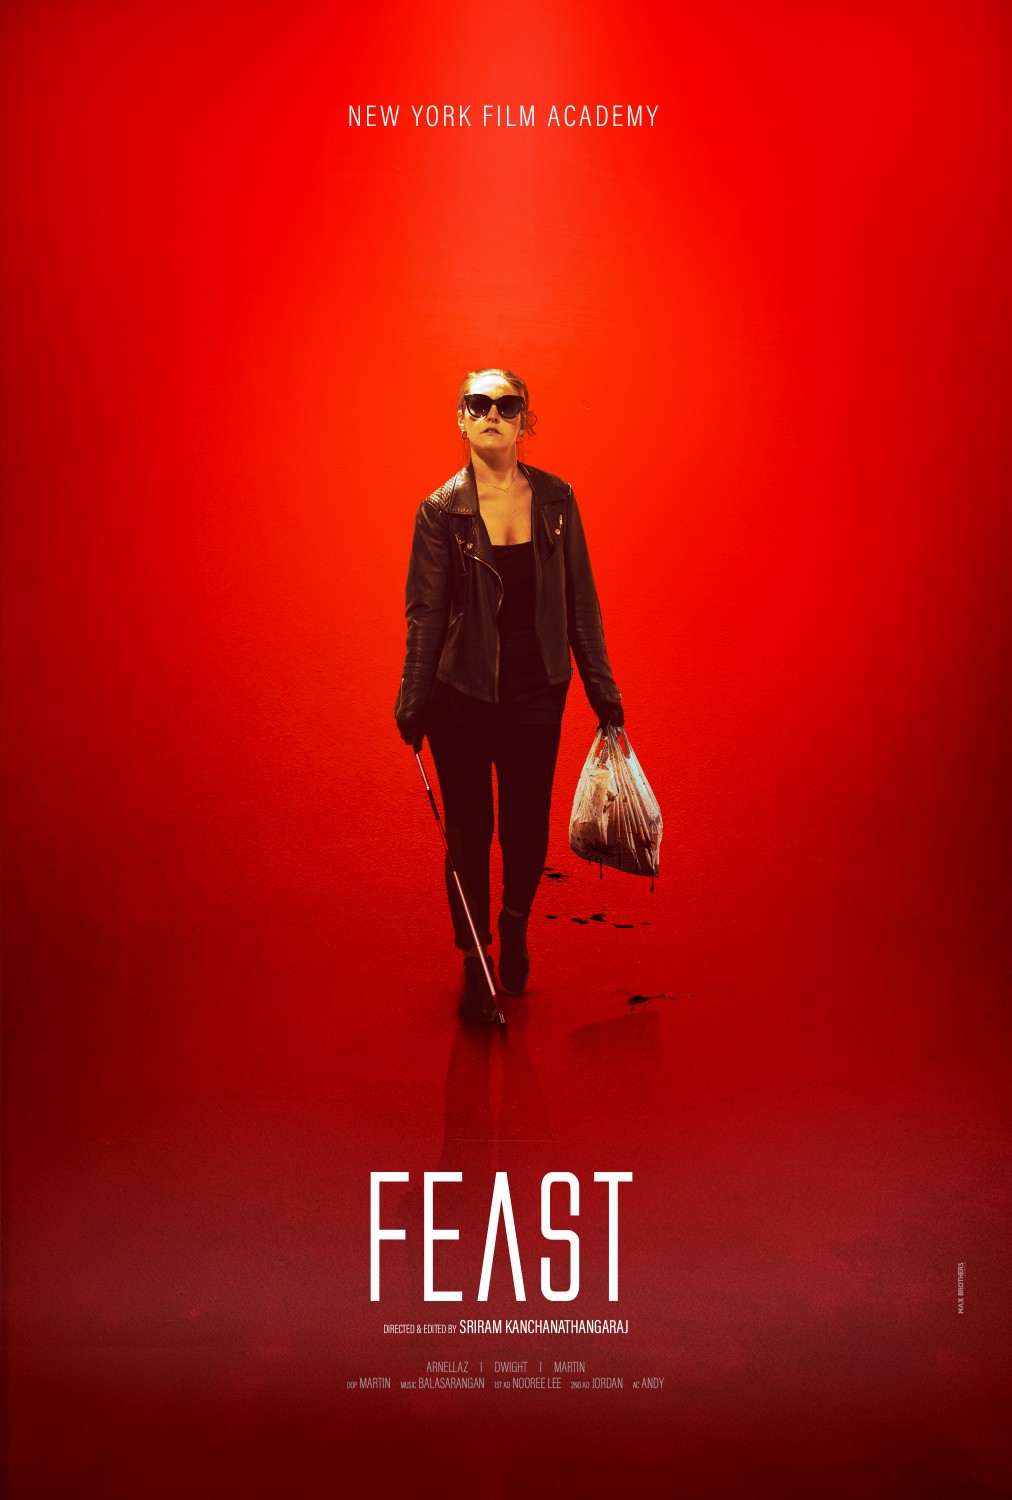 Extra Large Movie Poster Image for Feast